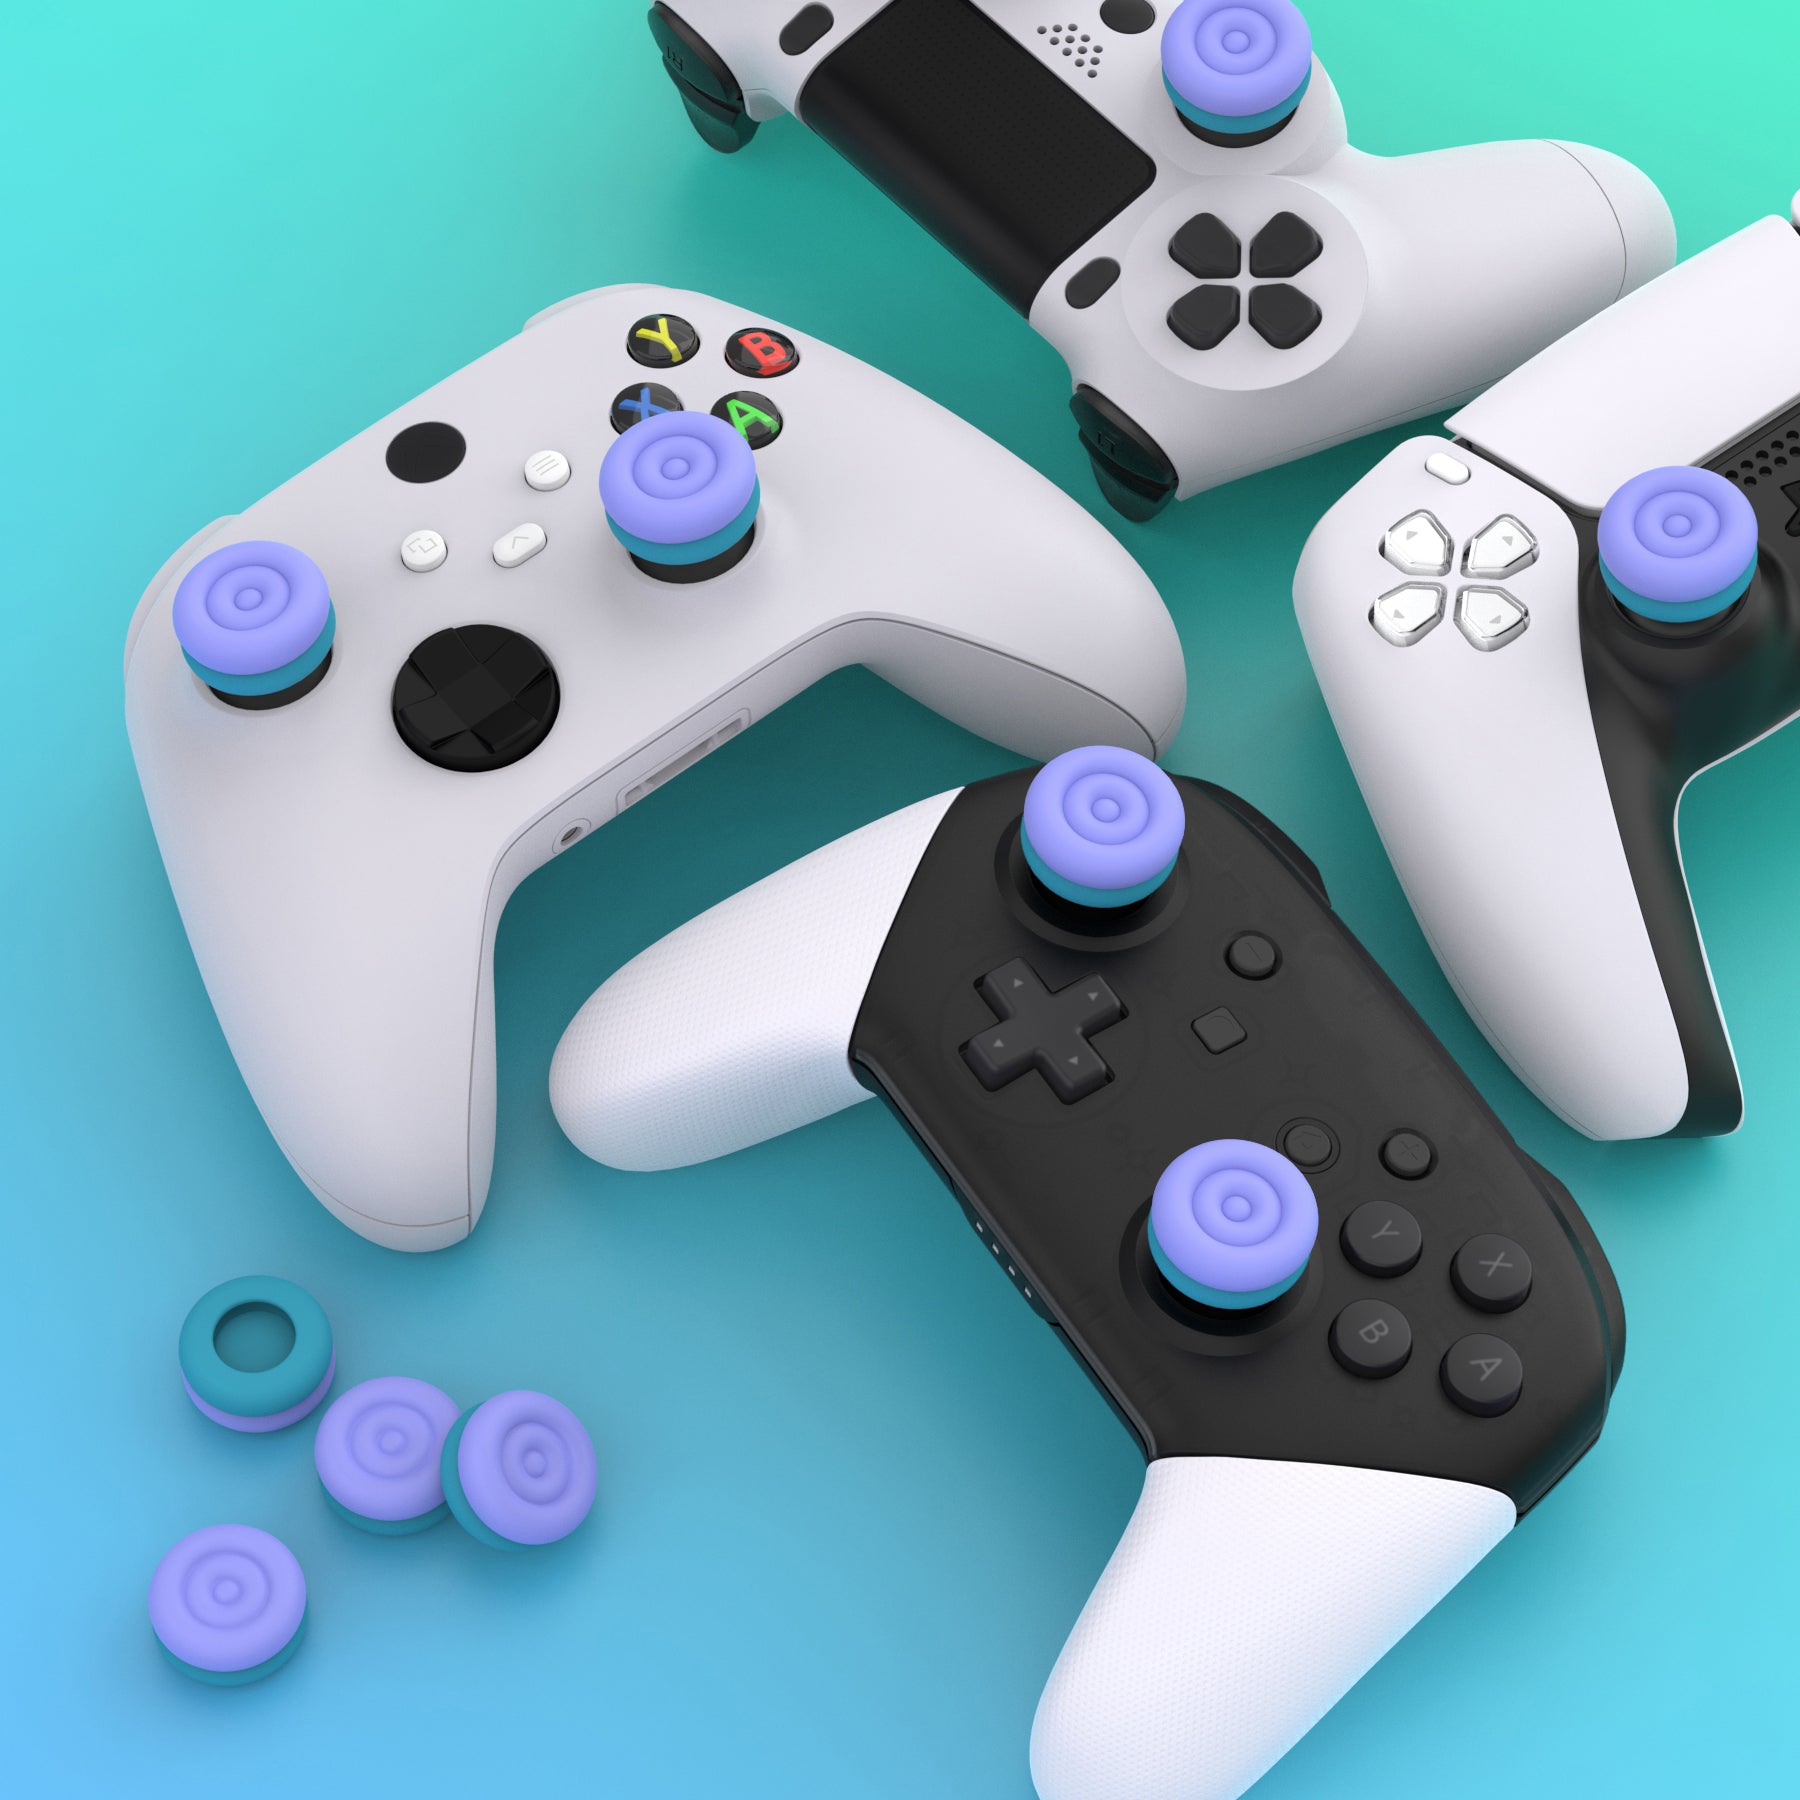 PlayVital Thumbs Cushion Caps Thumb Grips for ps5, for ps4, Thumbstick Grip Cover for Xbox Series X/S, Thumb Grip Caps for Xbox One, Elite Series 2, for Switch Pro Controller - Light Purple & Aqua Blue - PJM3042 PlayVital